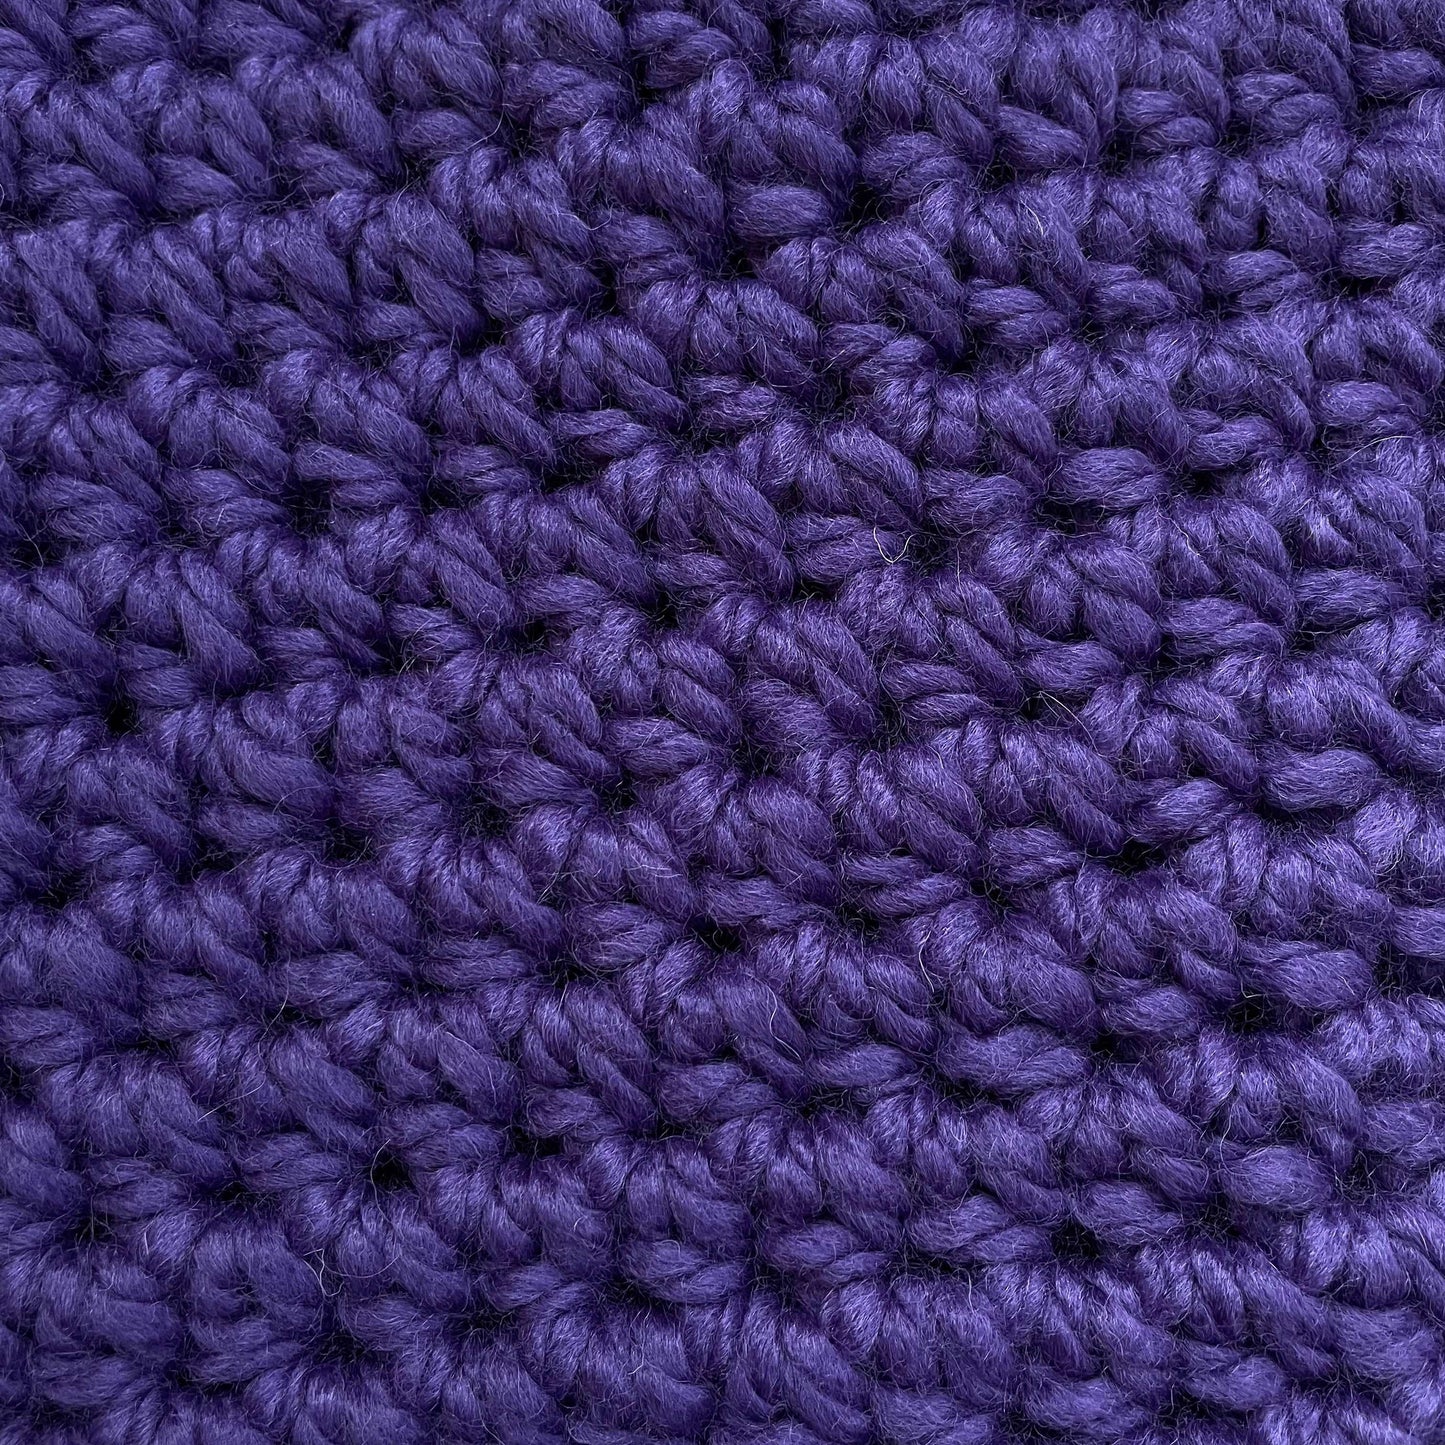 close up of purple yarn for color & stitch